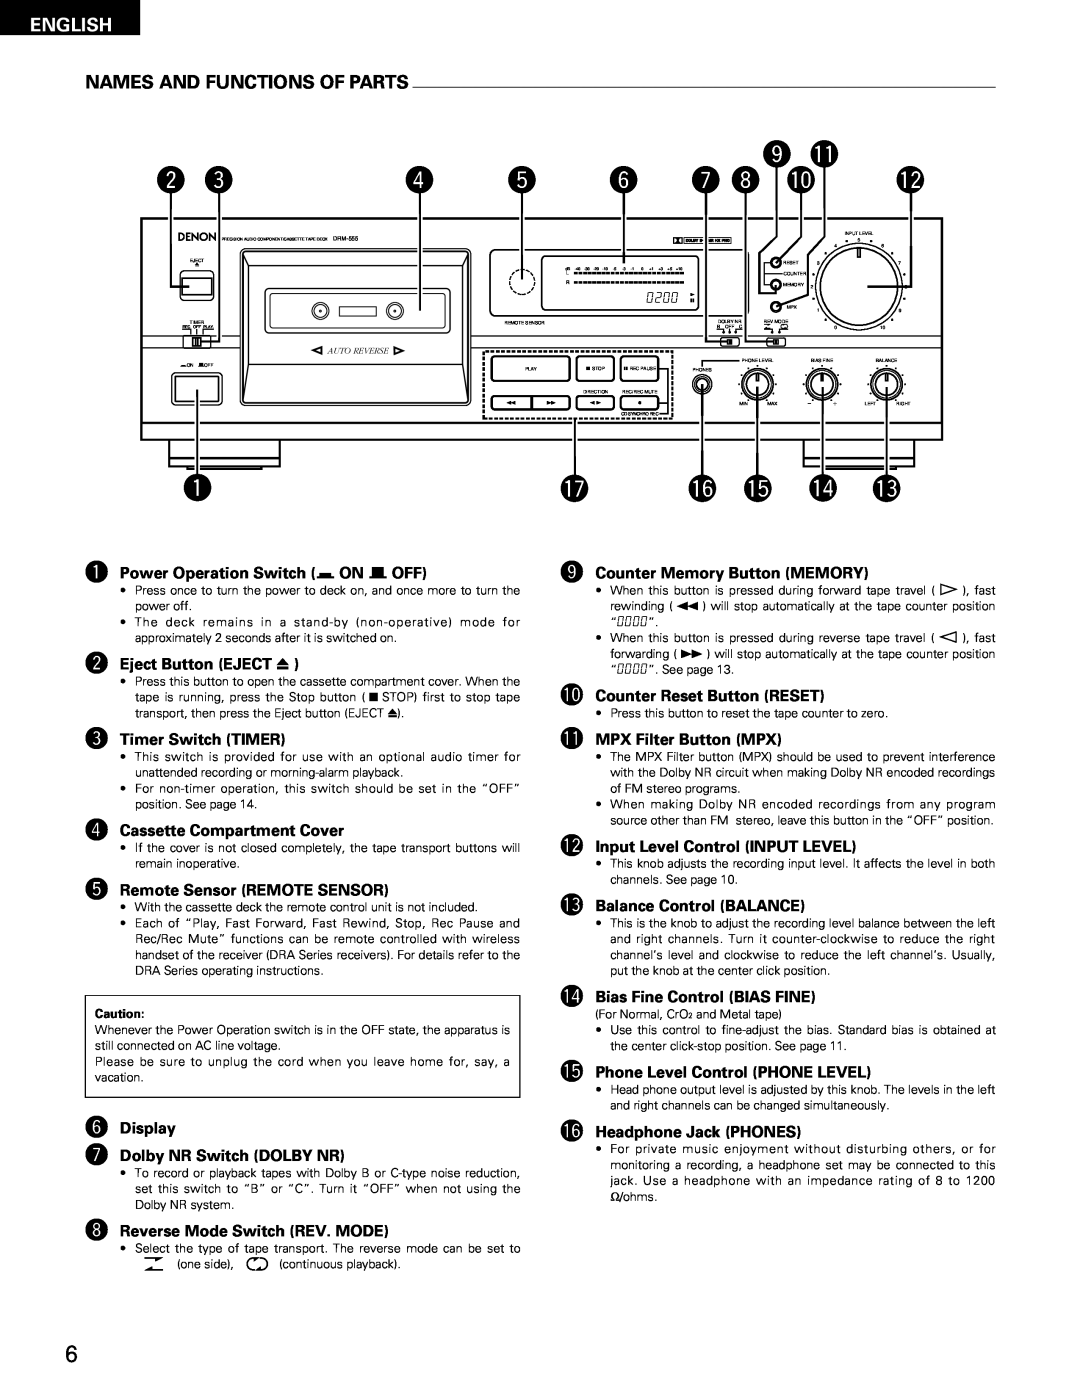 Denon DRM-555 manual Names And Functions Of Parts, o !1, r t y u i !0 !2, 6 !5, 4 !3, English 